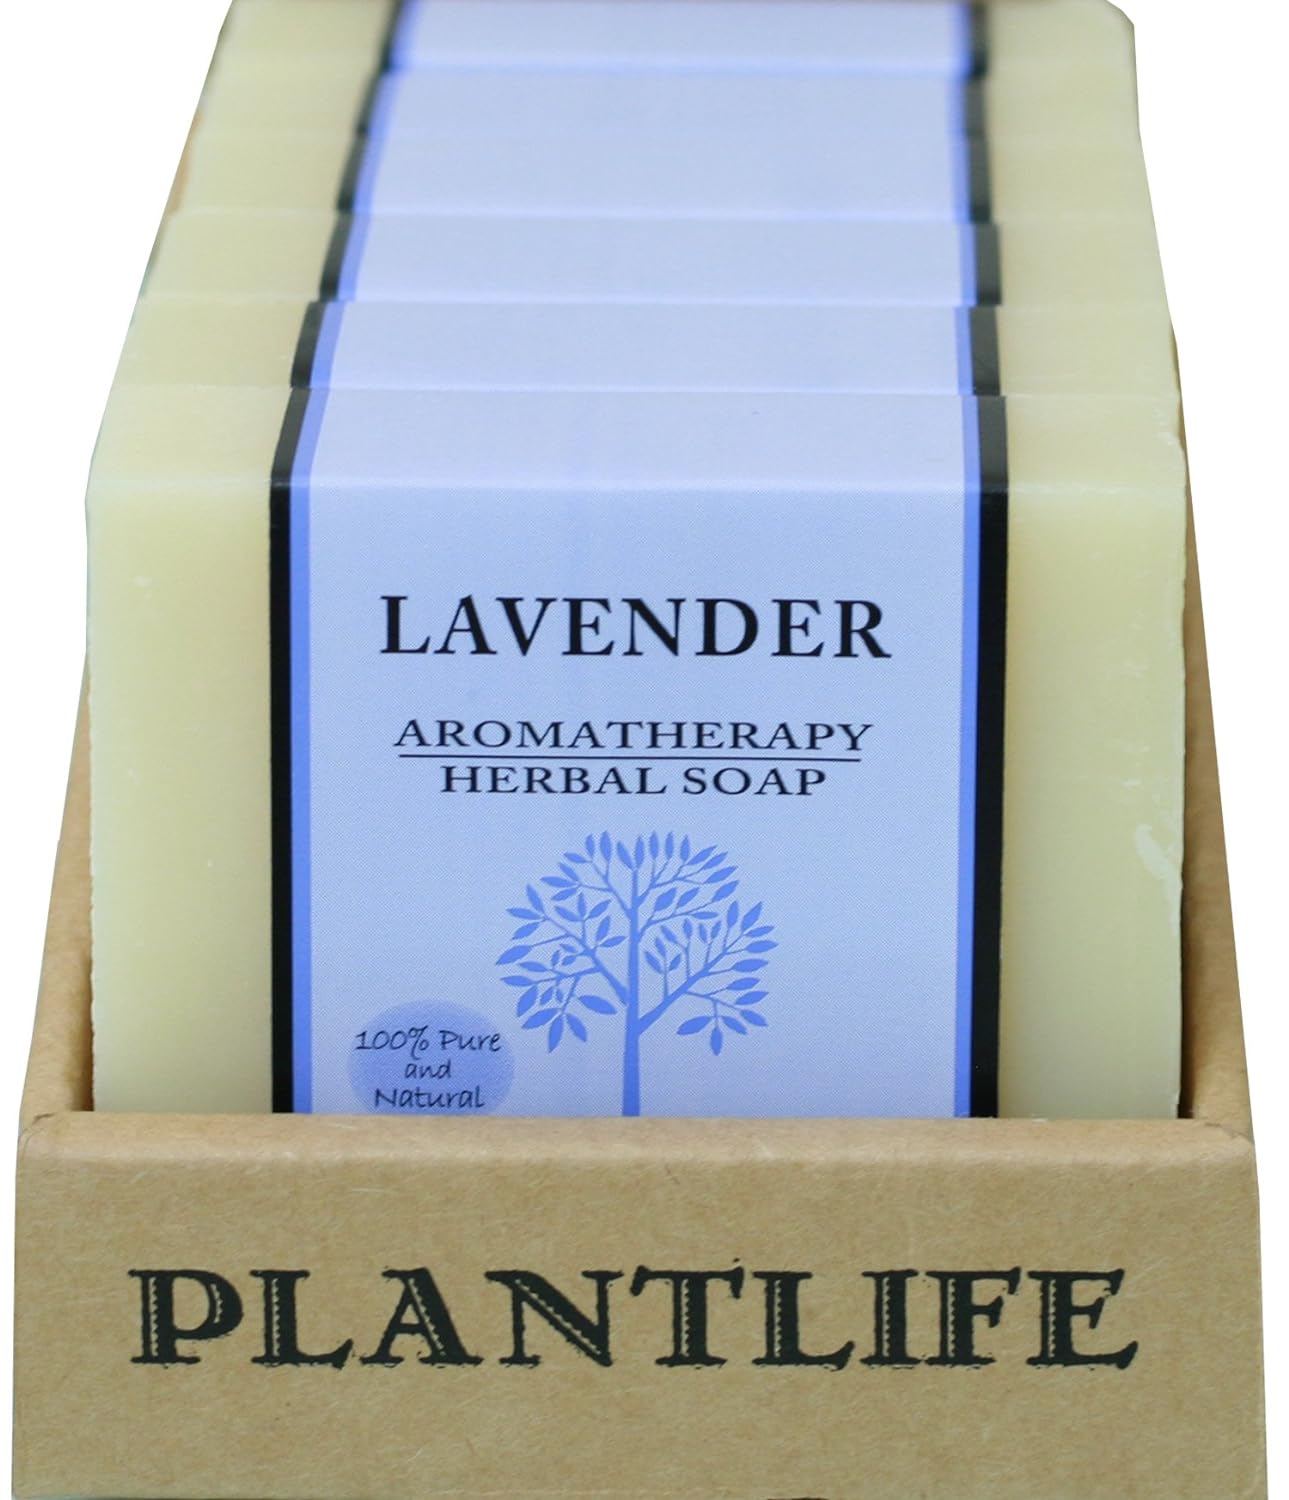 Plantlife Lavender 6-pack Bar Soap - Moisturizing and Soothing Soap for Your Skin - Hand Crafted Using Plant-Based Ingredients - Made in California 4 Bar